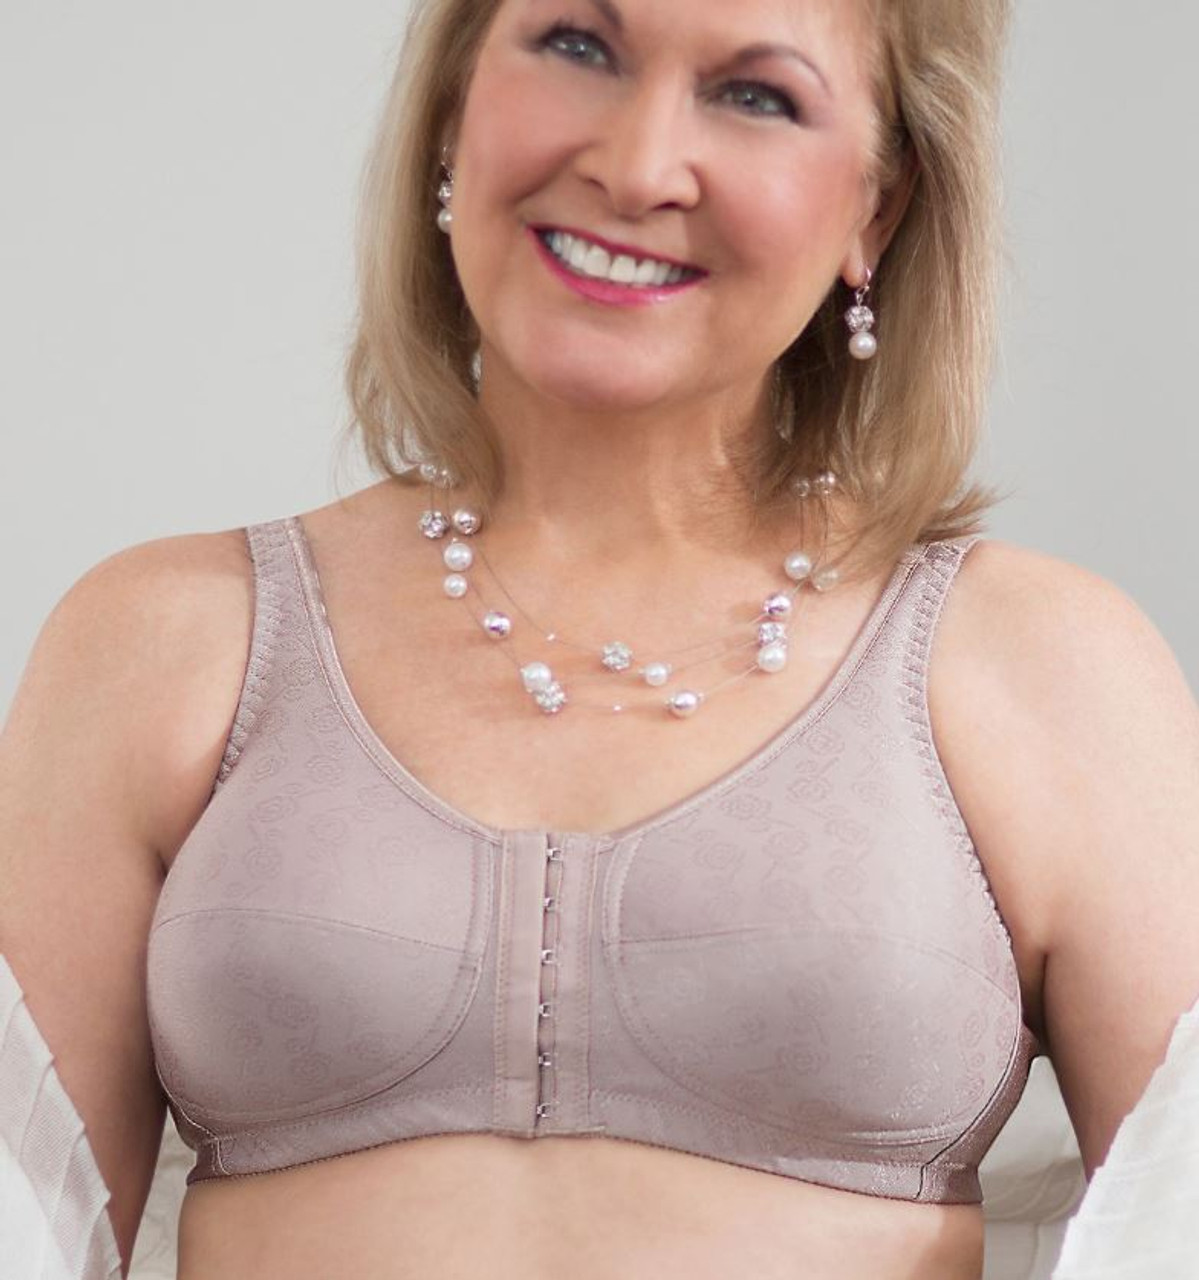 Front Close Mastectomy Bra with Modern Lace (Sister) 1105263-S -  1122506-F2:Pantone Tap Shoe:42H